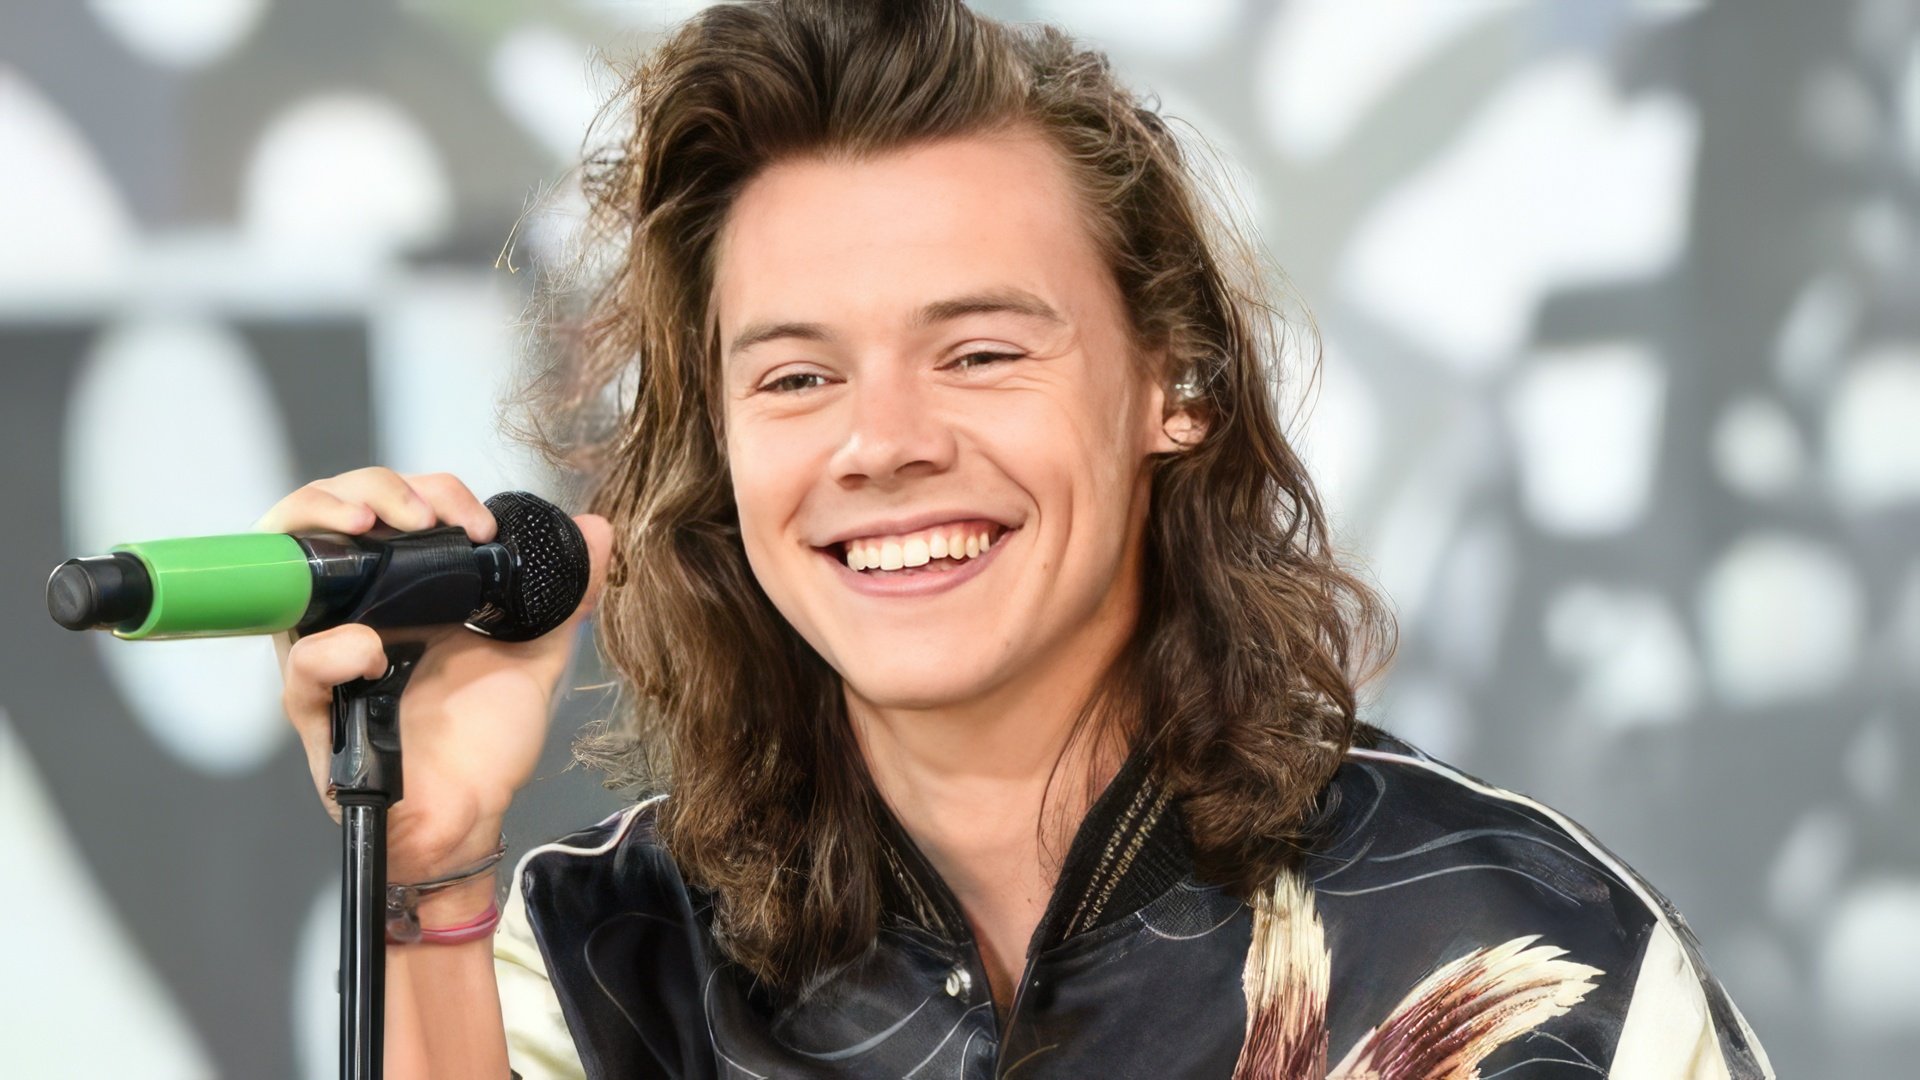 Singer and actor Harry Styles